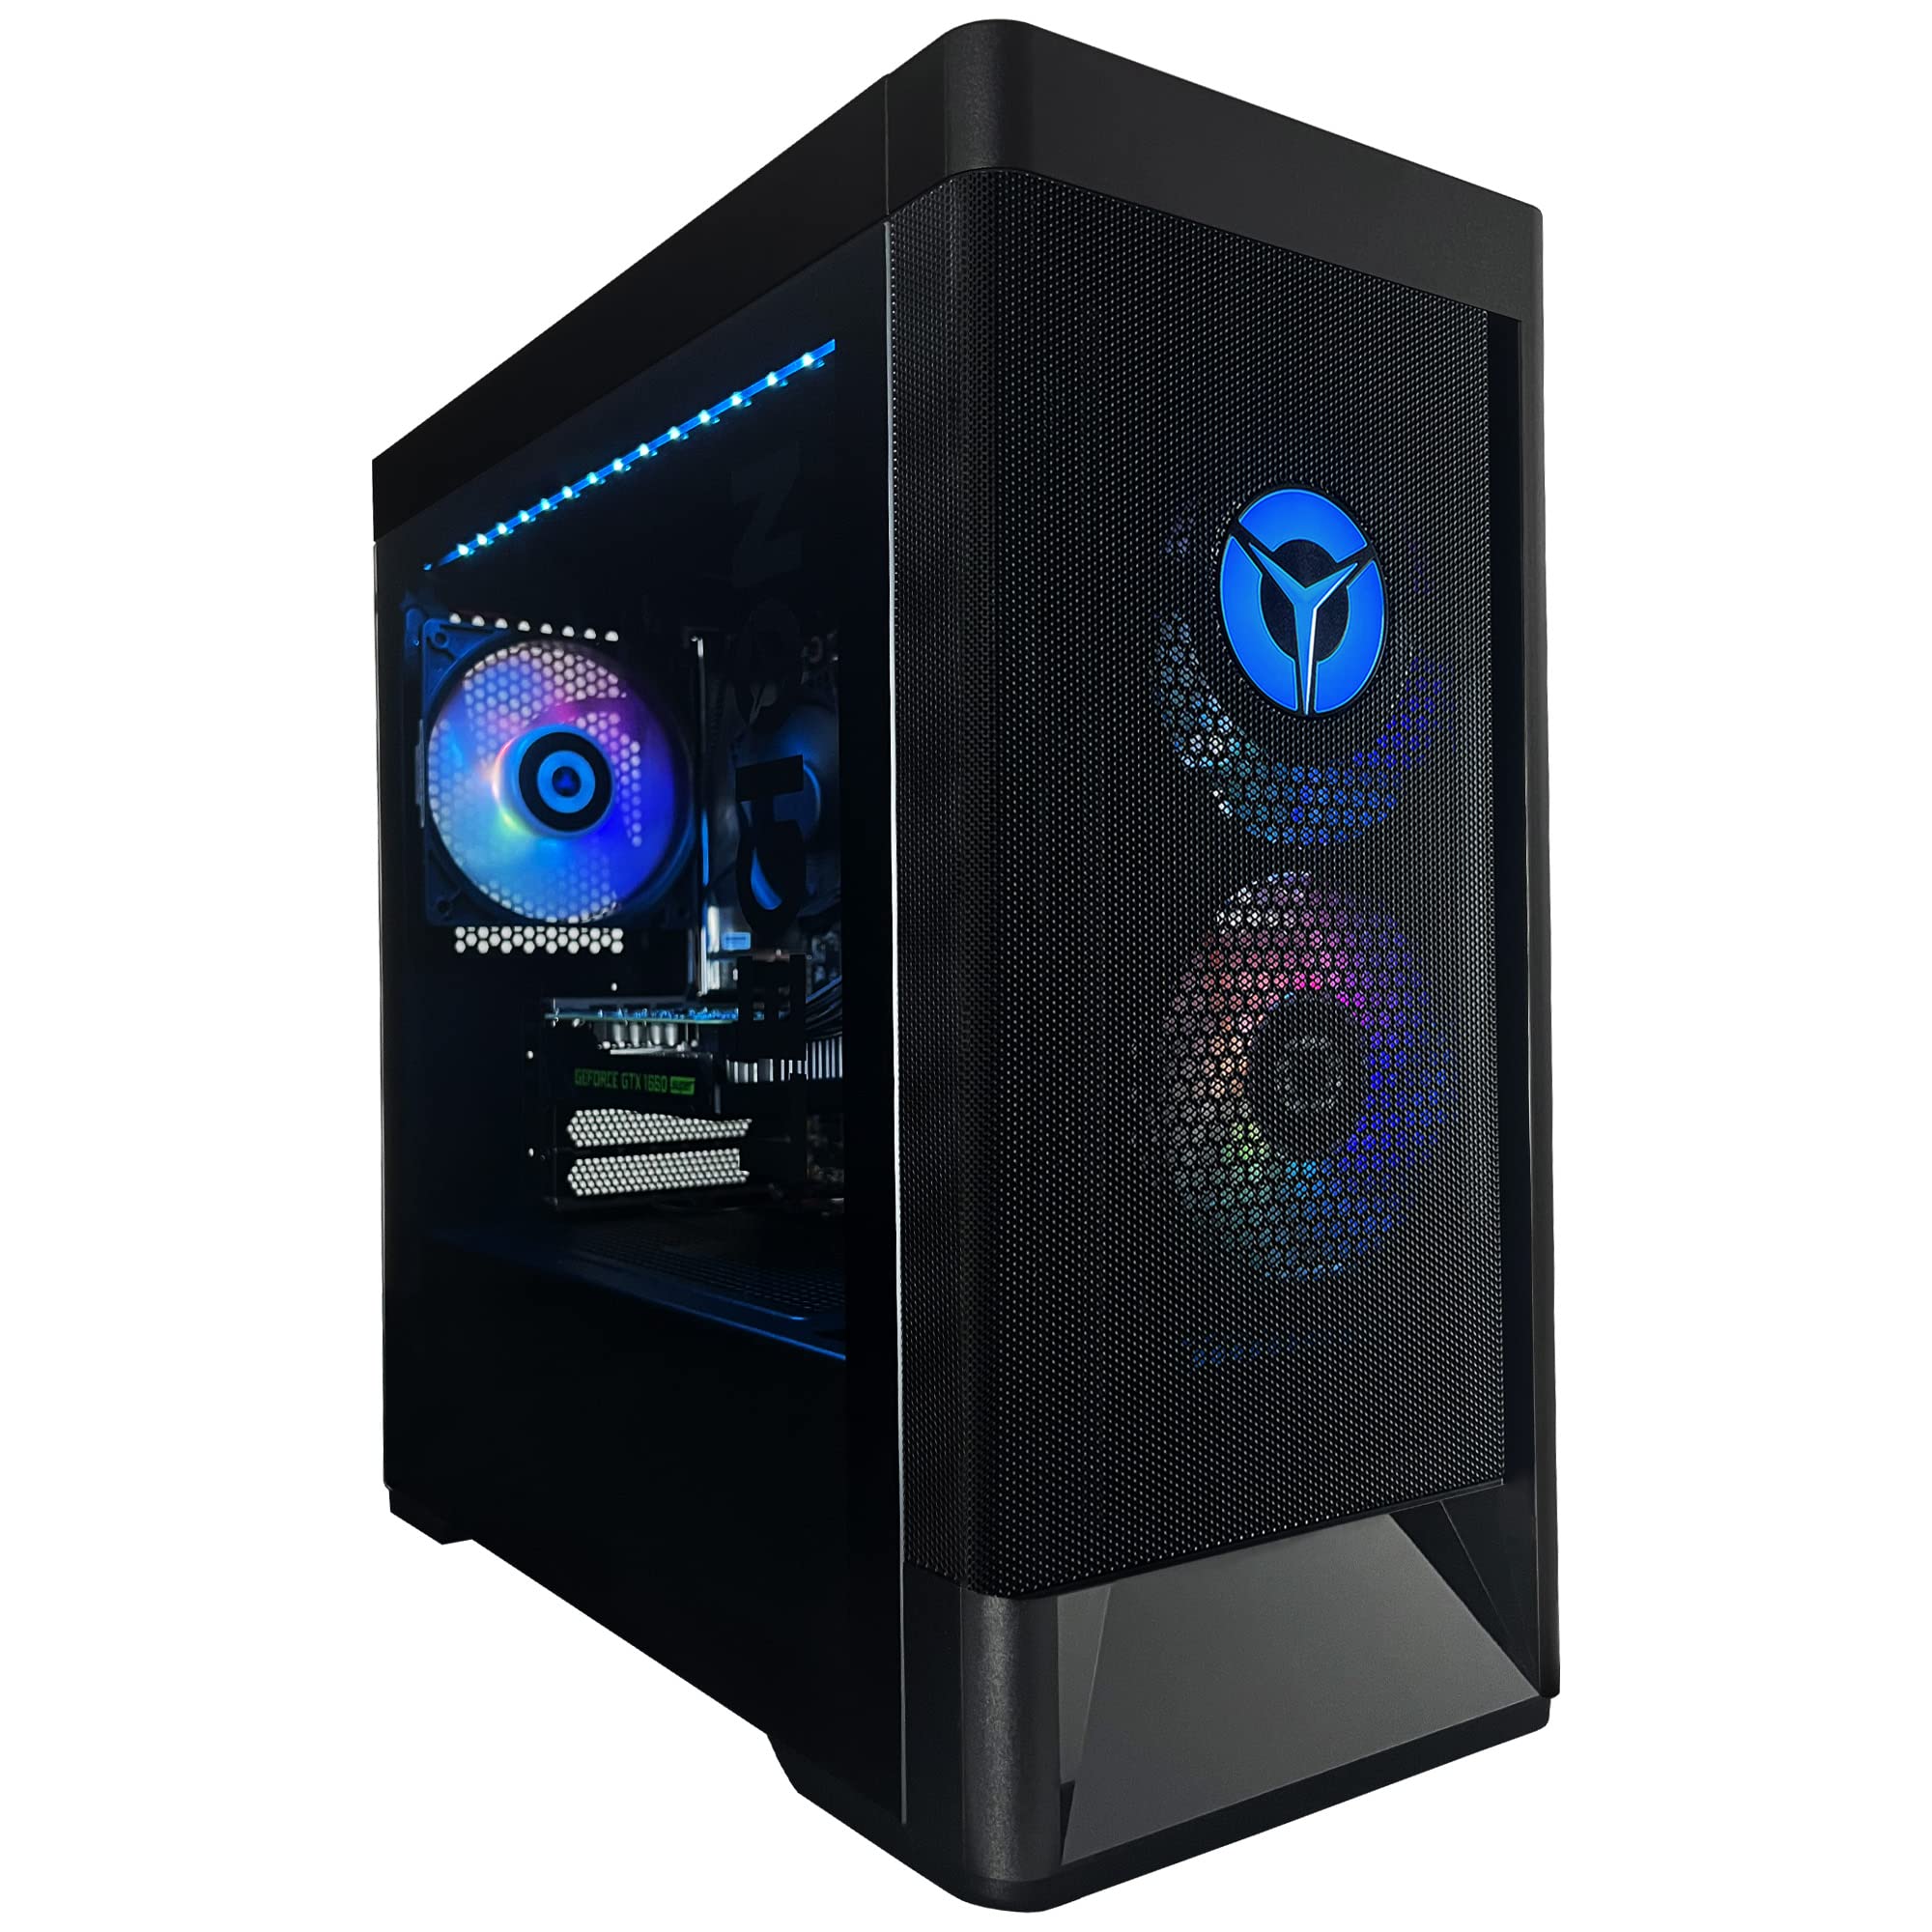 Lenovo Legion T5 Gaming Tower Computer - 11th Gen Intel Core i5-11500 6-Core up to 4.60 GHz CPU, 32GB DDR4 RAM, 1TB NVMe SSD + 2TB HDD, GeForce GTX 1660 Super 6GB Graphics Card, Windows 11 Home